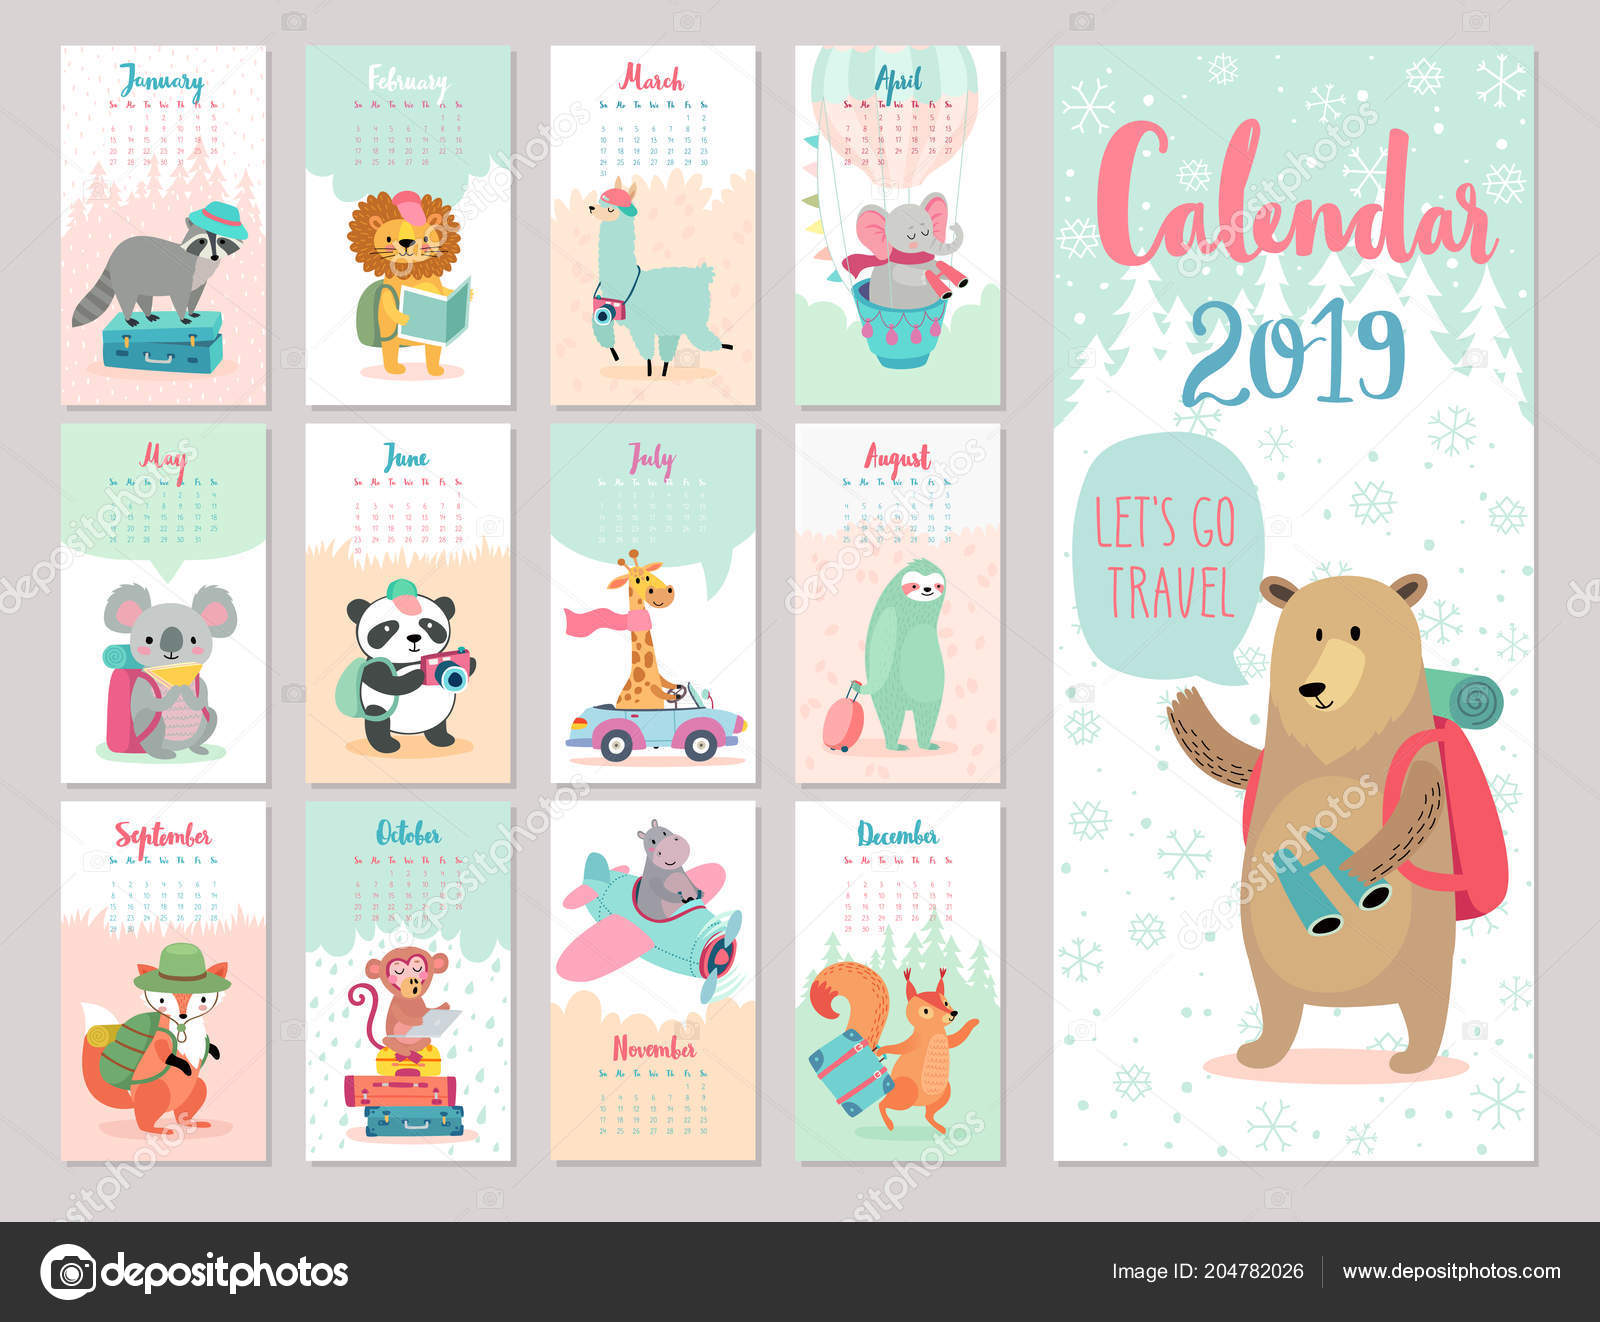 calendar-2019-cute-monthly-calendar-forest-animals-hand-drawn-style-stock-vector-image-by